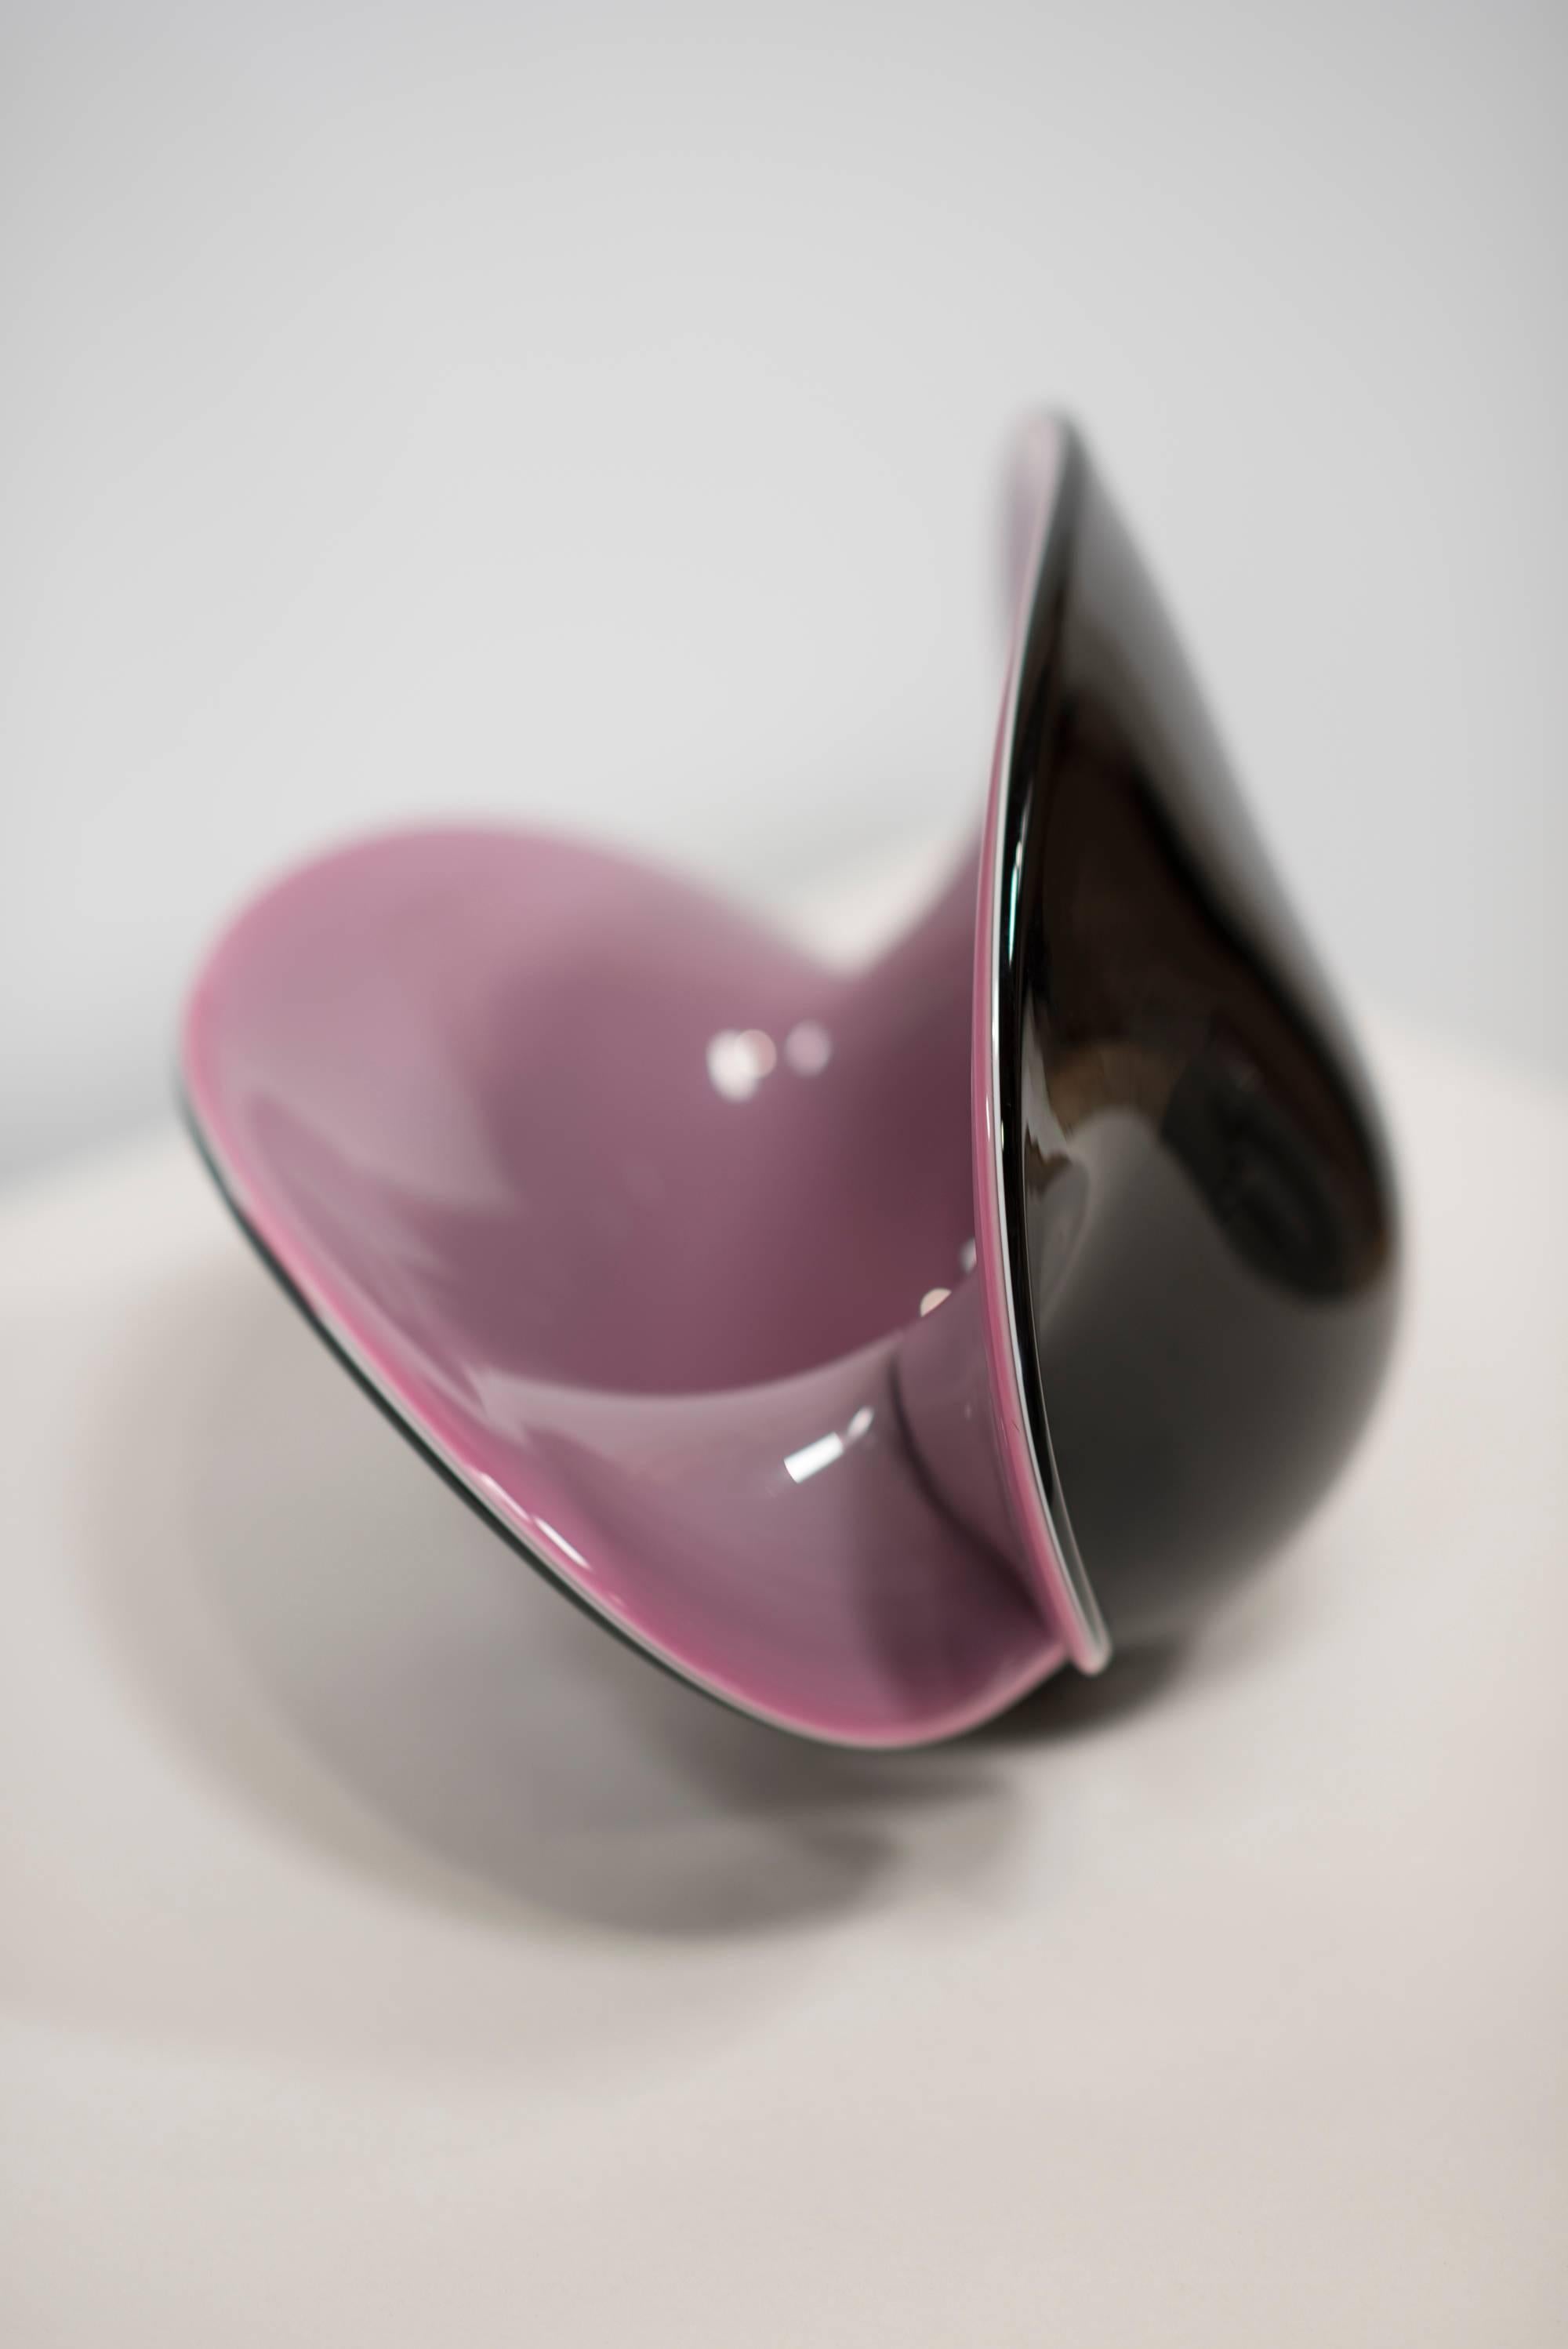 A large-scale Italian mauve and deep black coloured art glass in the form of a giant clam shell. The massive shell-form bowl of encased glass has an interior of mauve coloured glass within the black exterior. MURANO glass design, circa 1950. This is